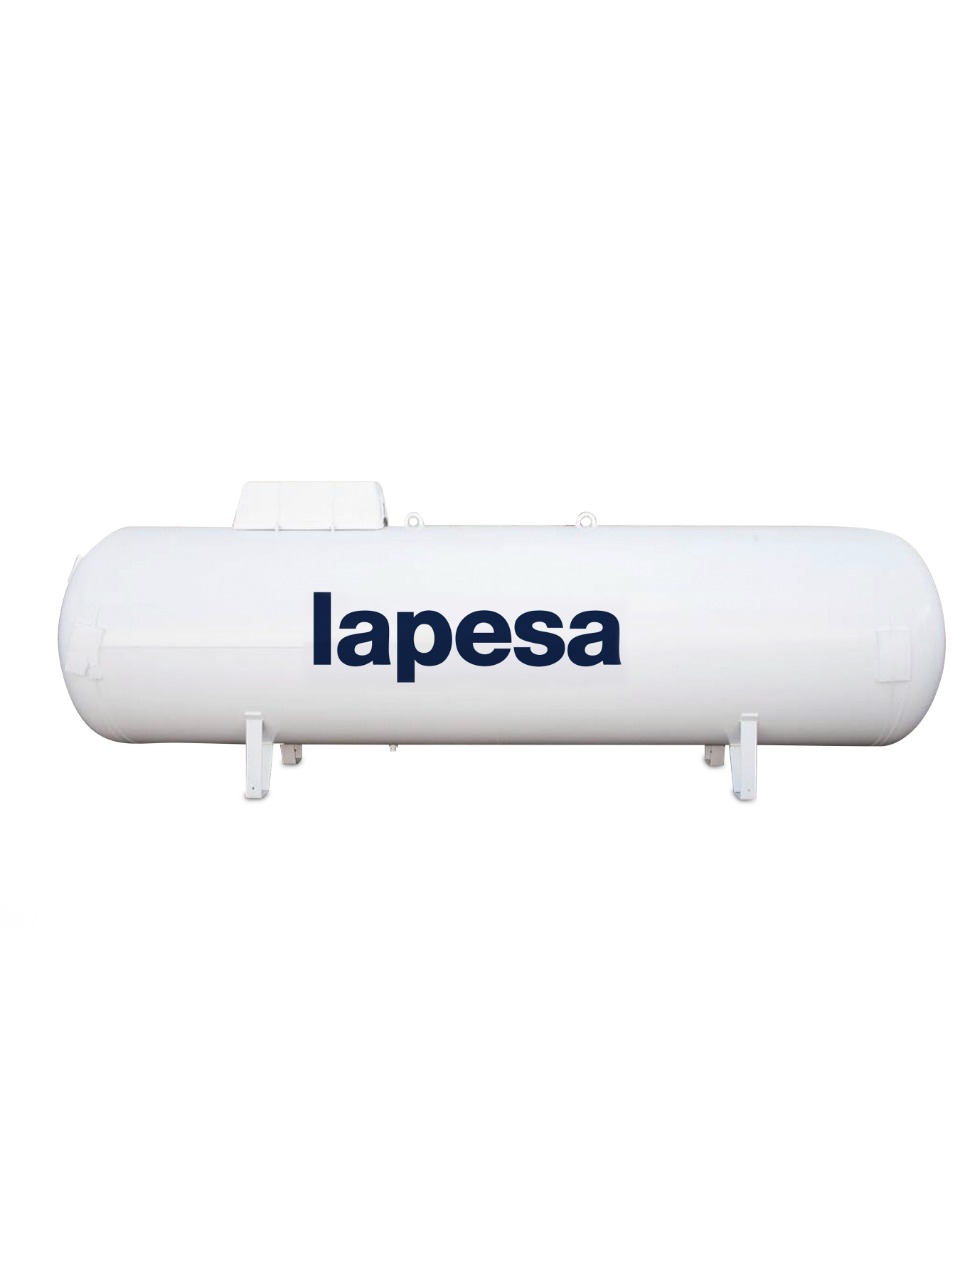 LPG TANK LAPESA 3750 LITERS ABOVE GROUND WITH STANDARD VALVE FITTINGS from Gas Equipment Company Llc Abu Dhabi, UNITED ARAB EMIRATES